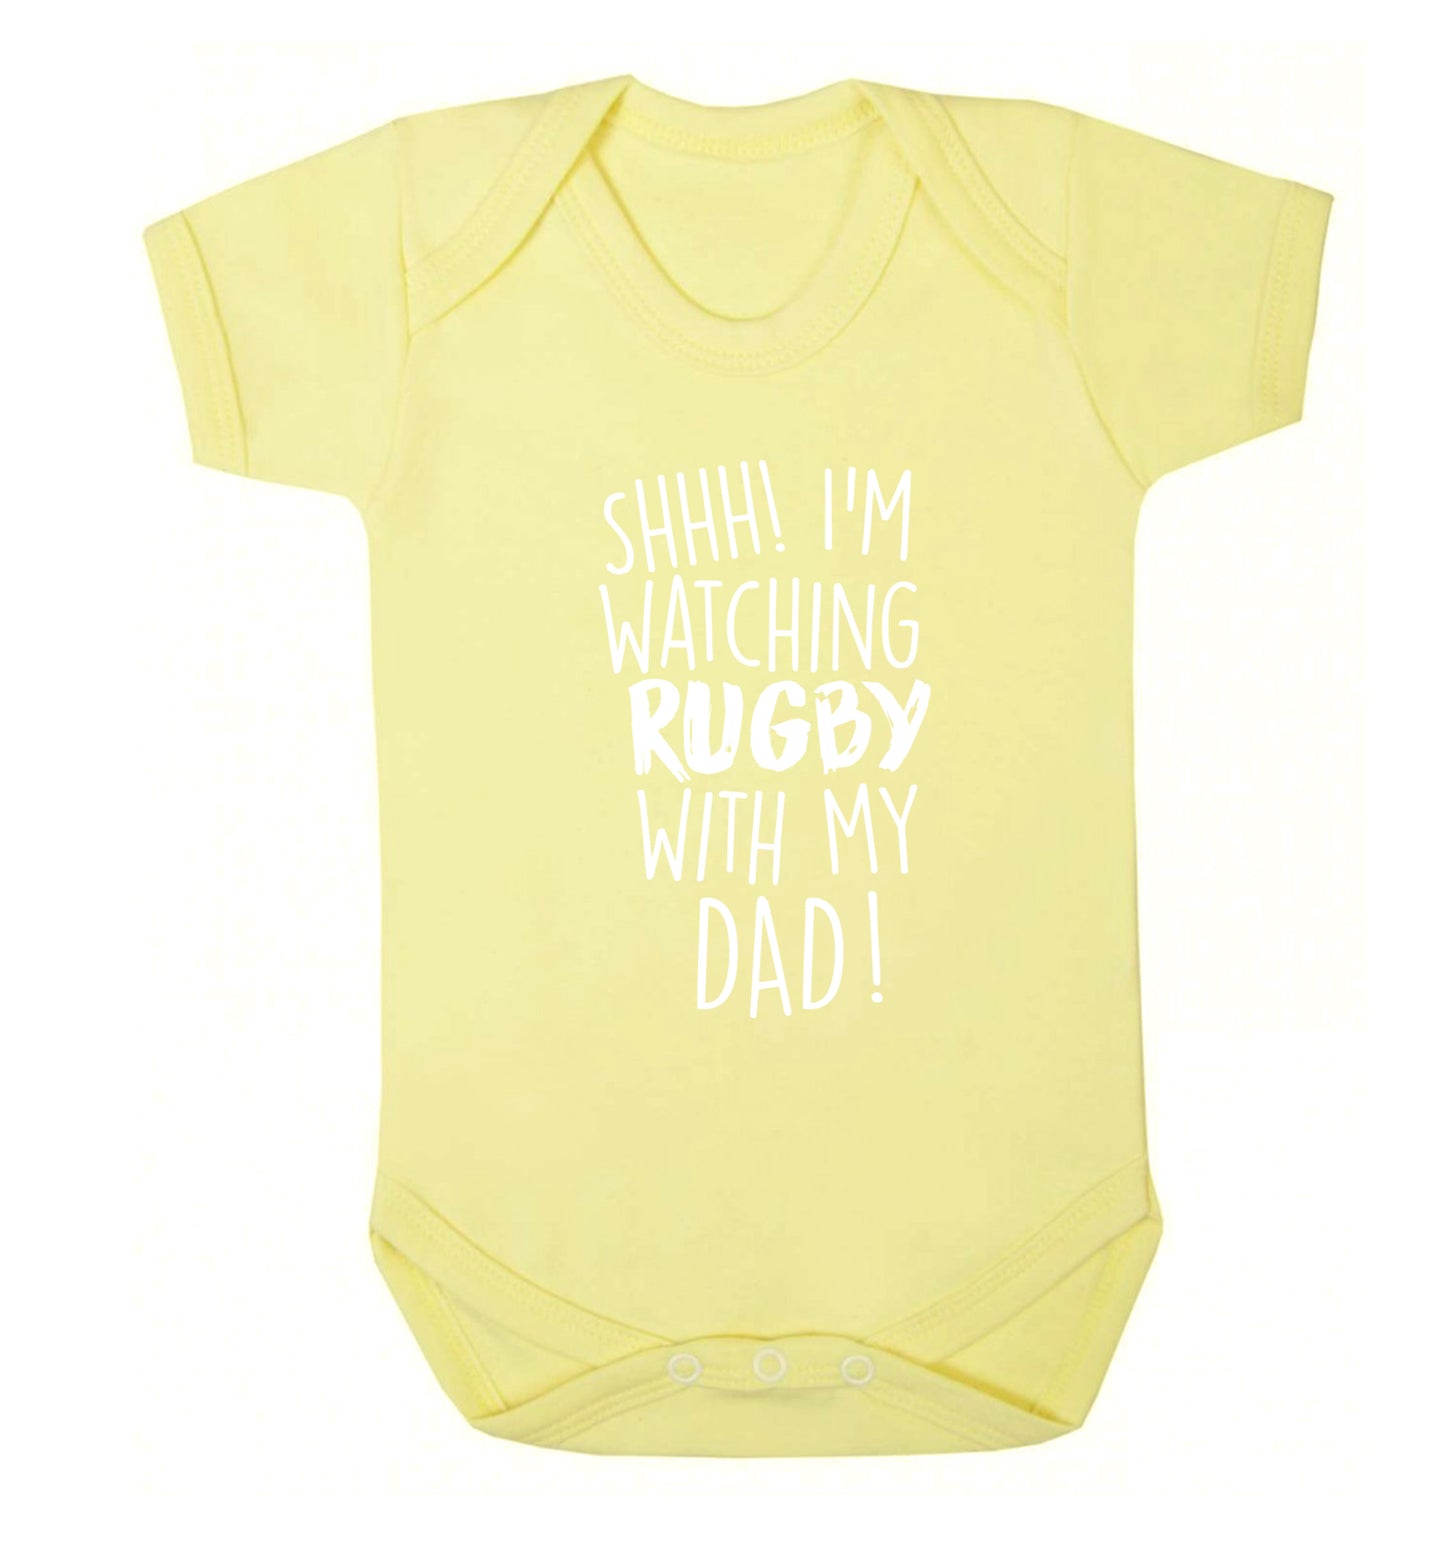 Shh... I'm watching rugby with my dad Baby Vest pale yellow 18-24 months